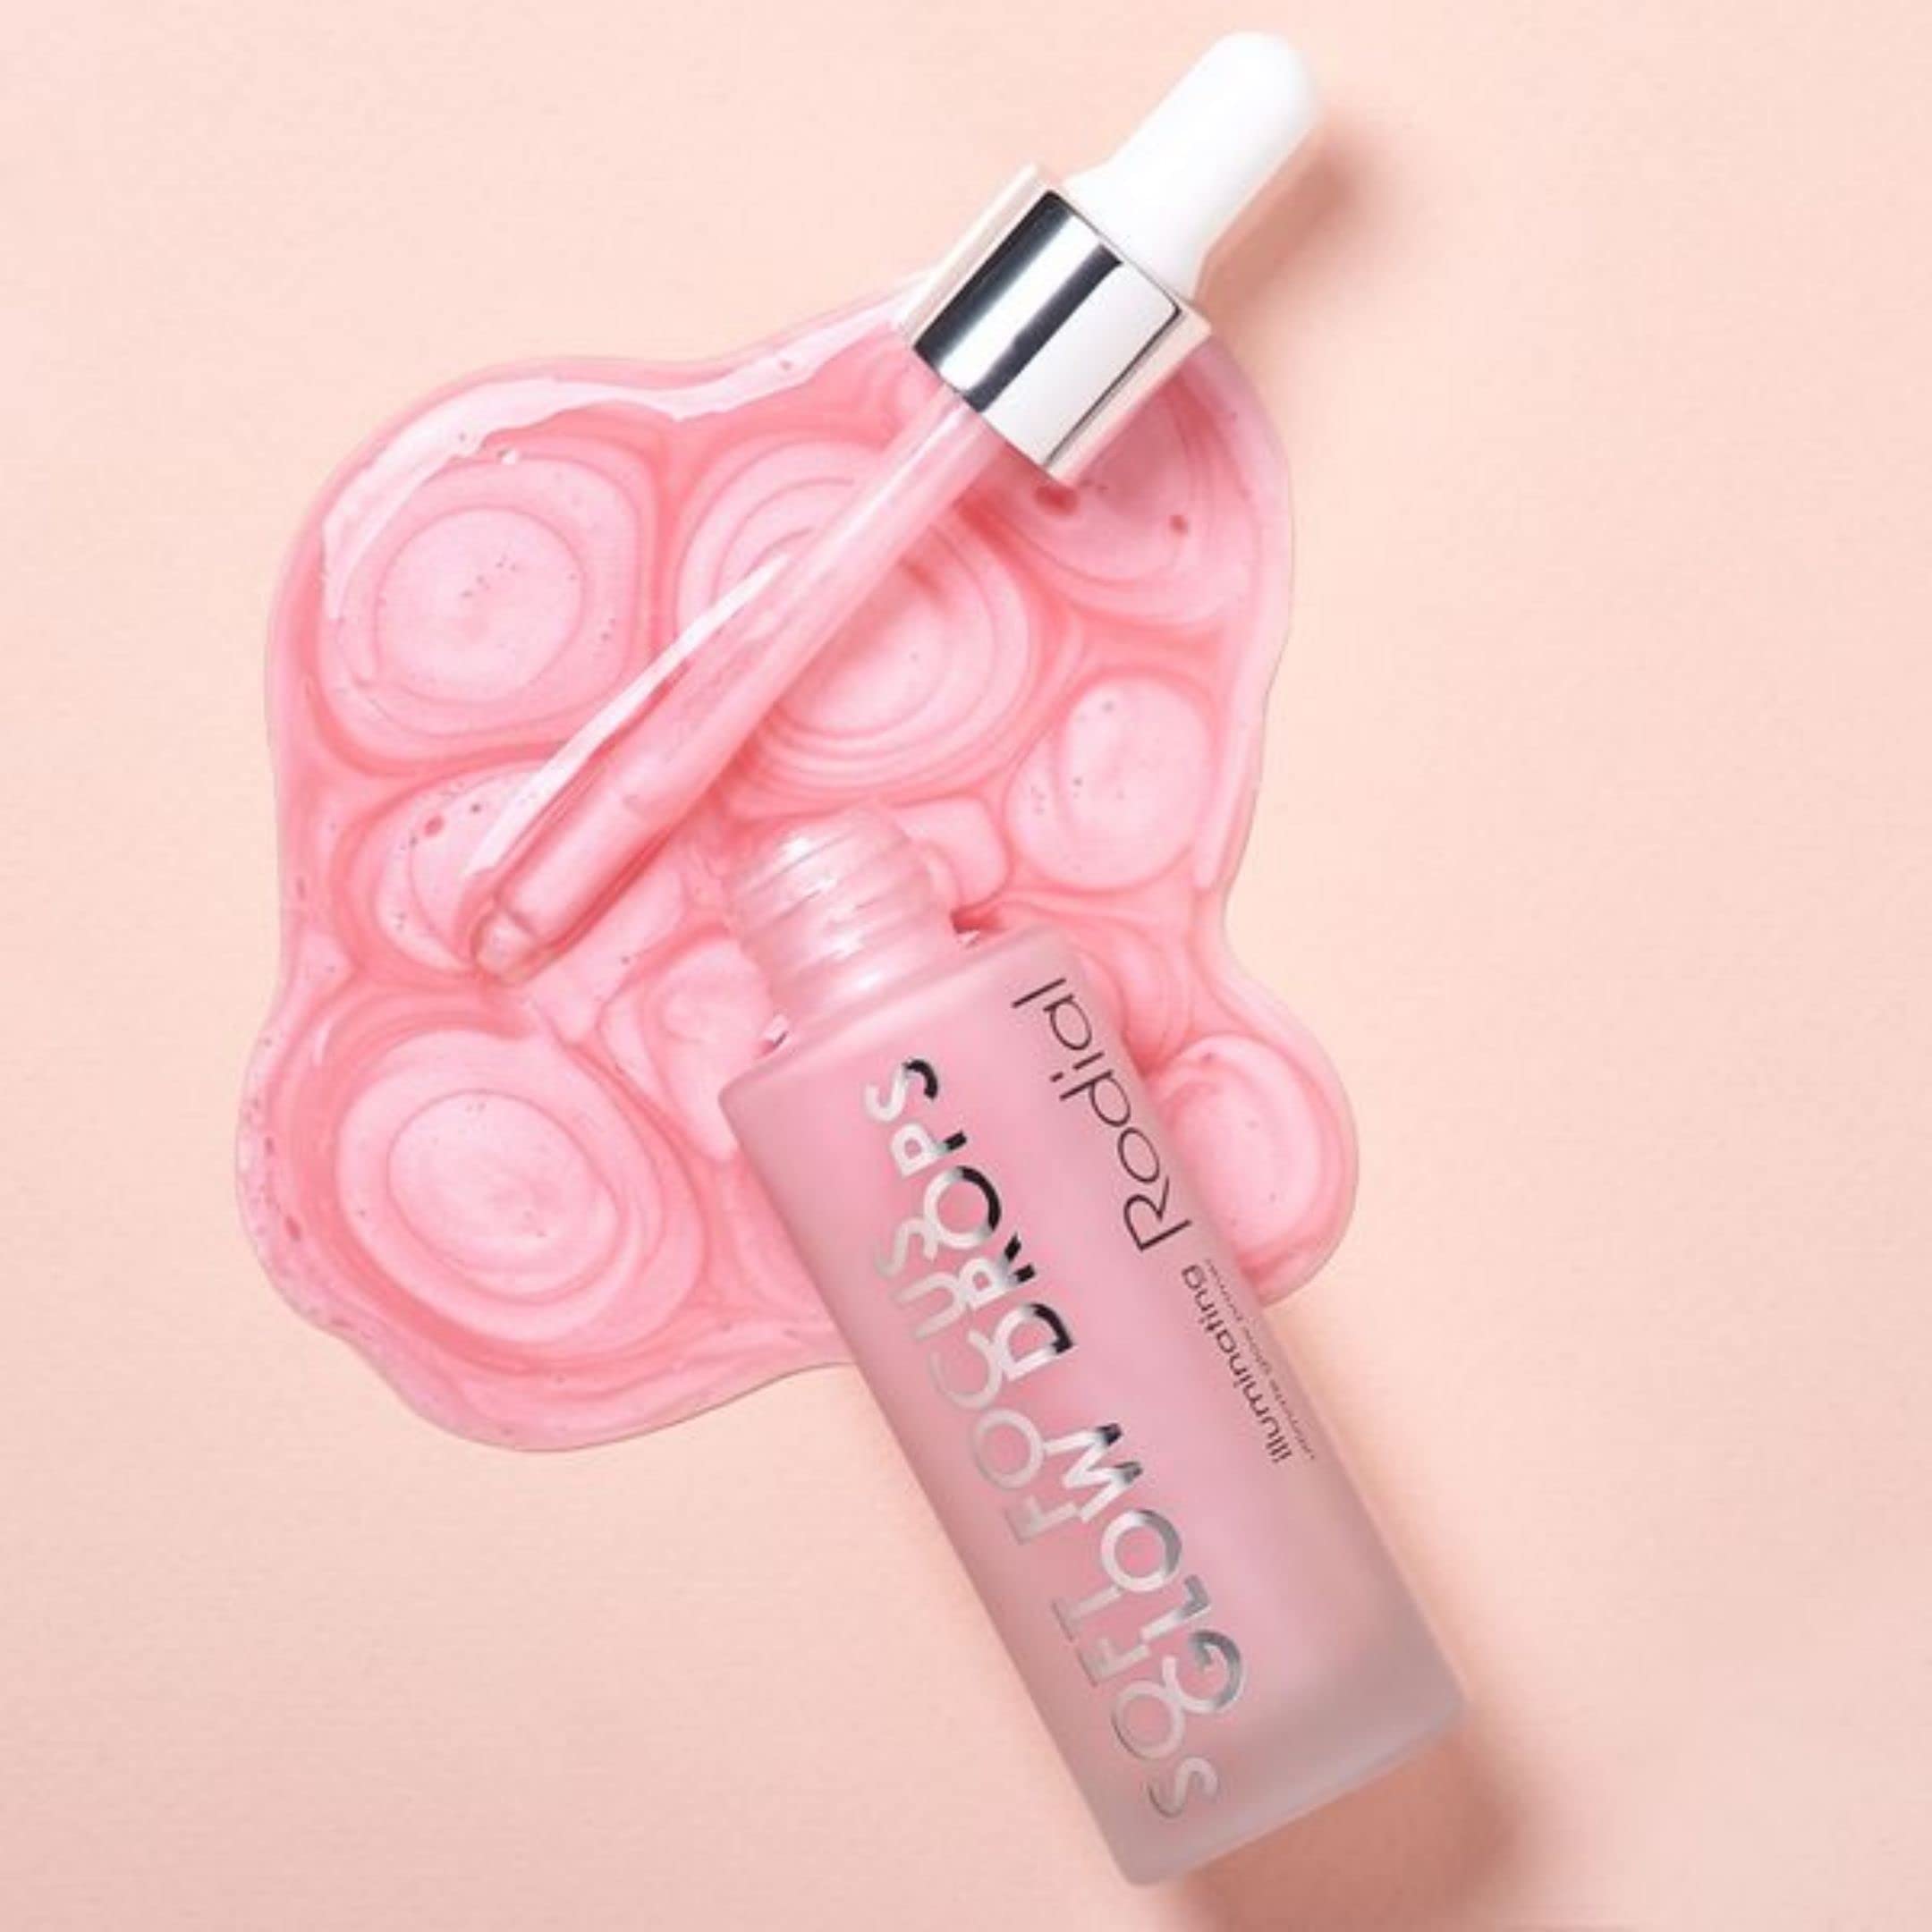 Soft Focus Glow Booster Drops, Illuminating Skin Serum with Glycerin and Antioxidants, Perfectioning and Smoothing Dewy Makeup Base, Weightless Formula